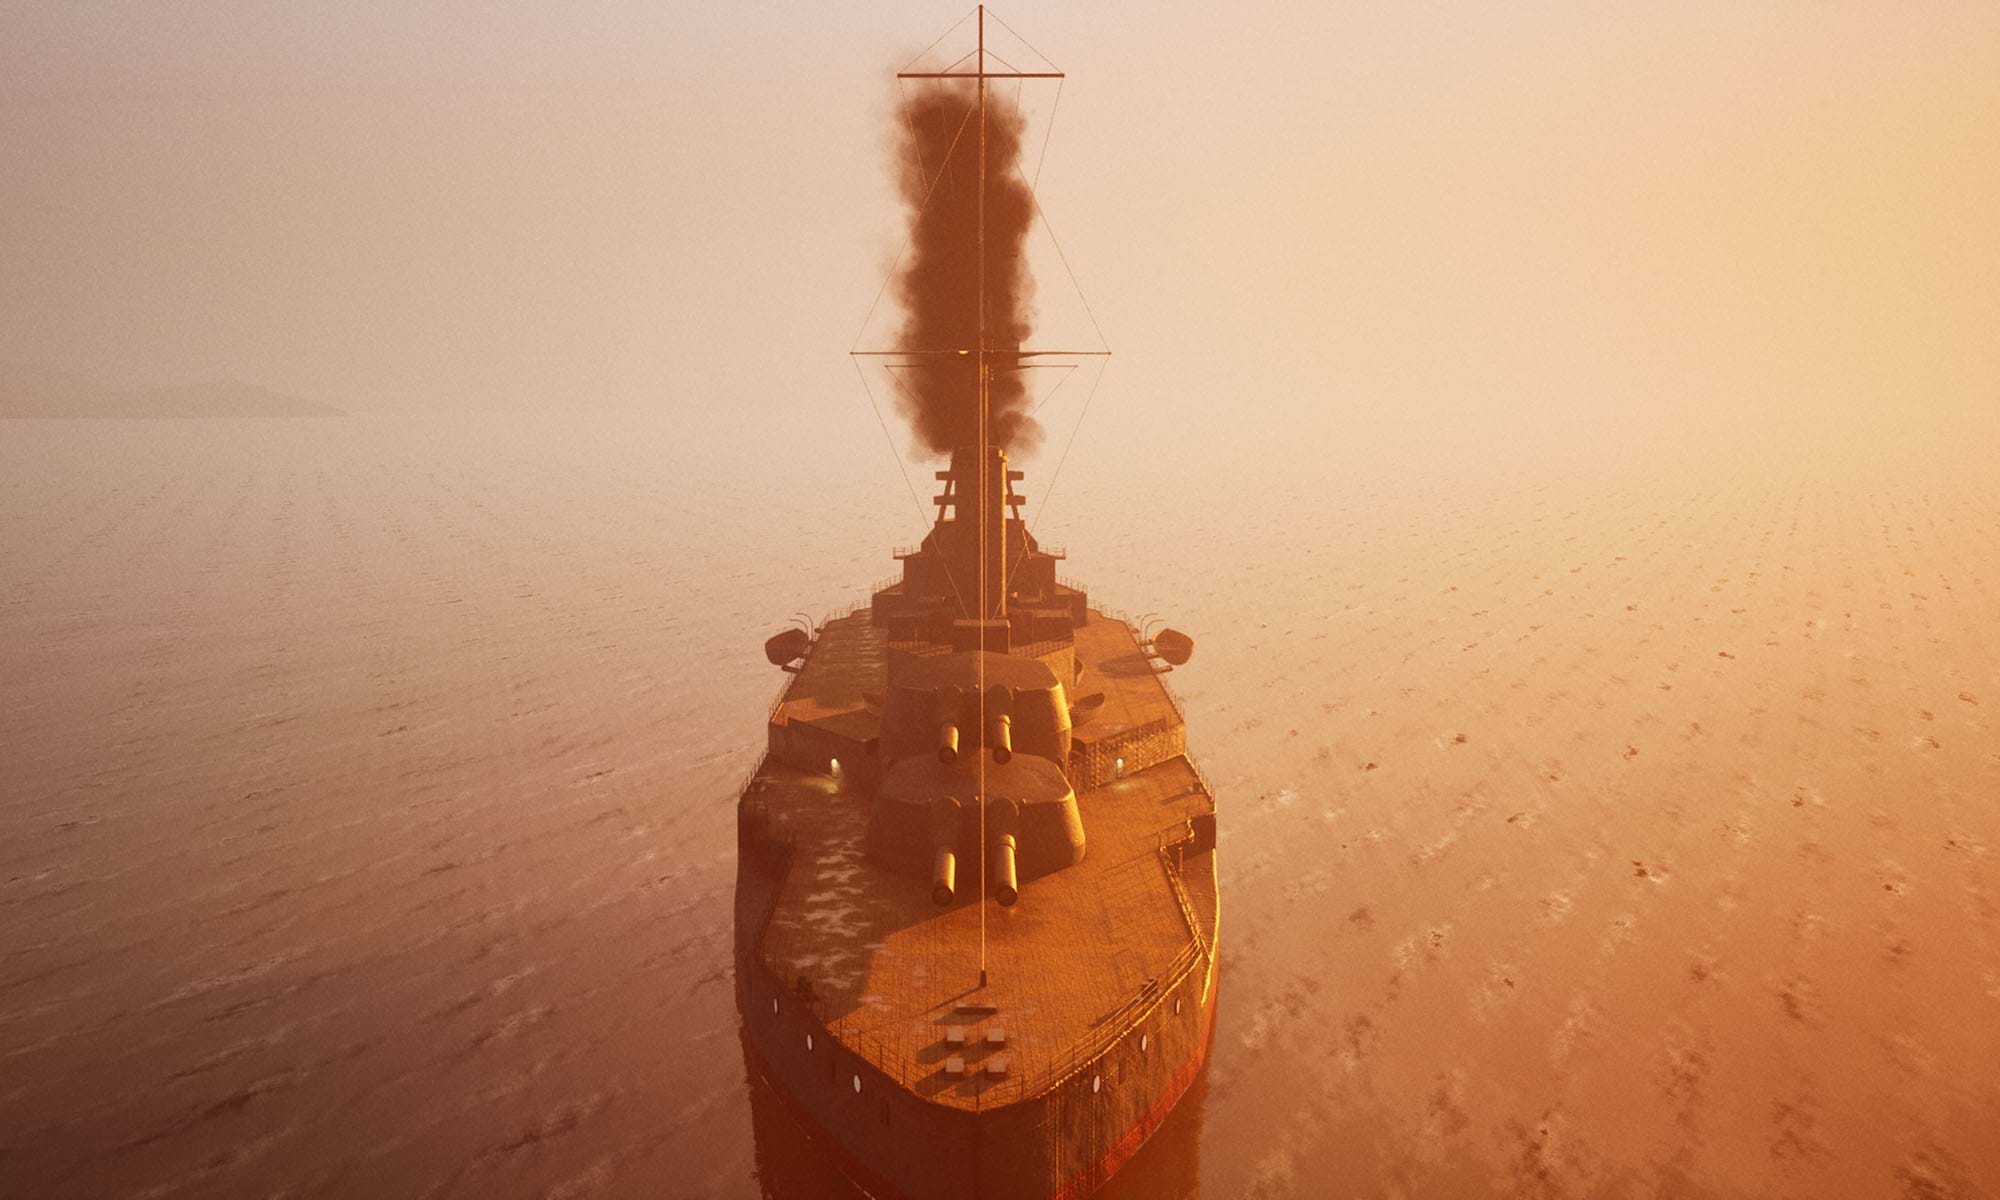 'Resurrecting the Super Dreadnought: HMS Warspite' is a 2023 Digital Graduate Show project by Alex McKay, a Games Design and Production student at Abertay University.